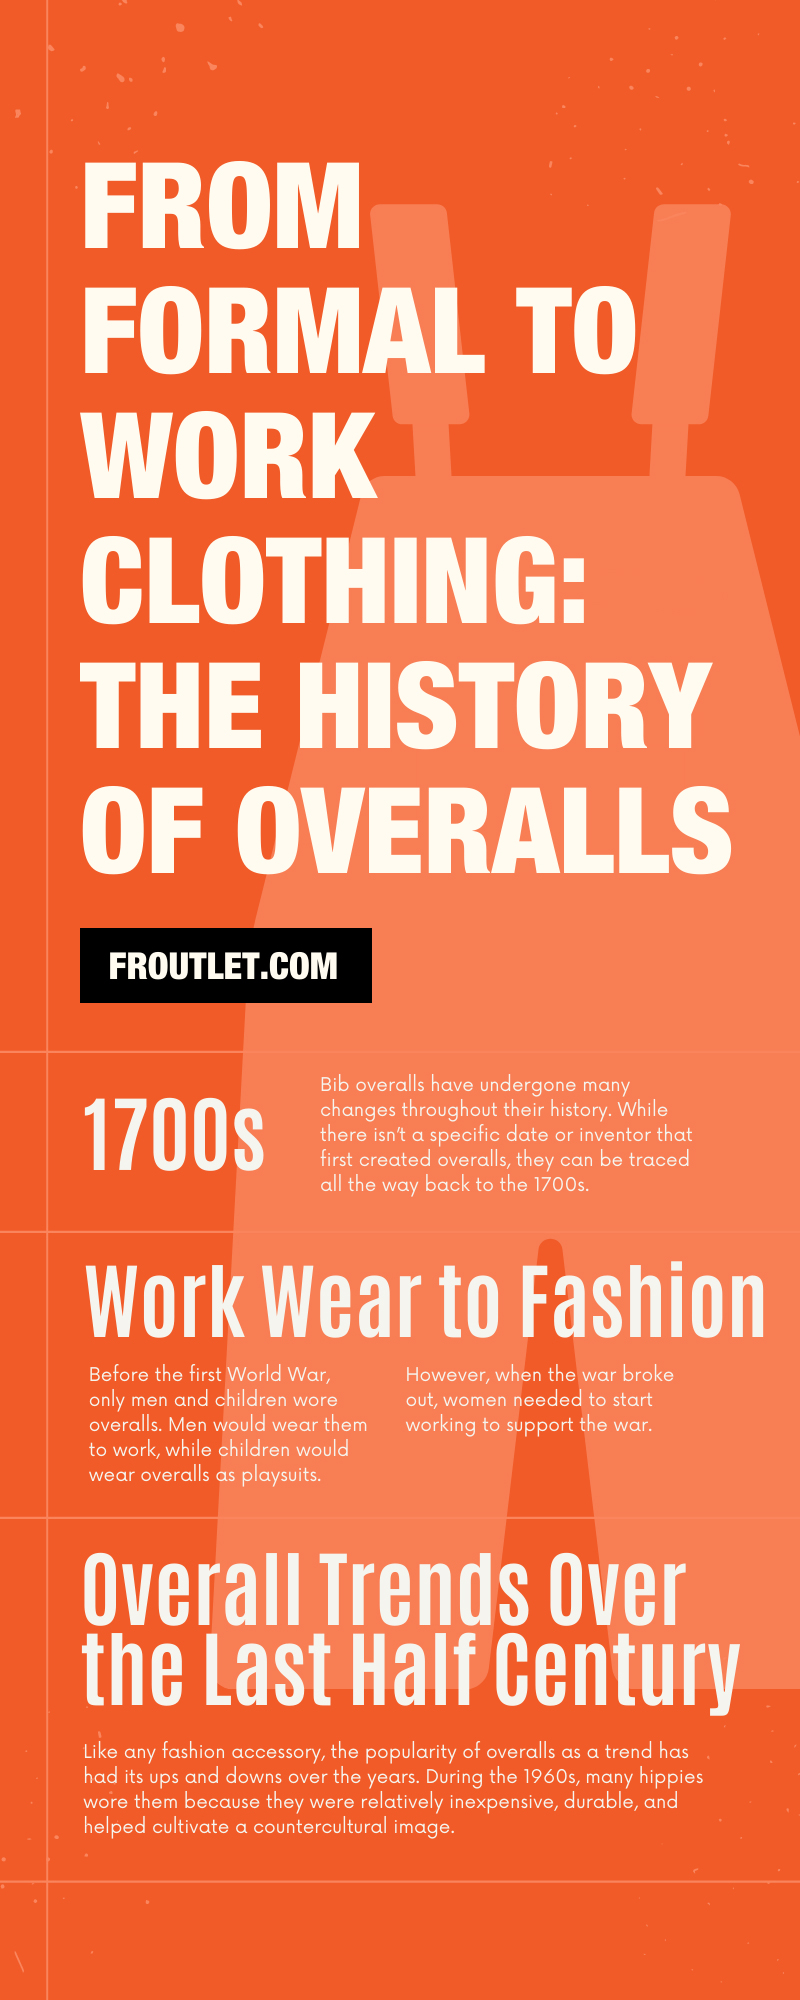 From Formal to Work Clothing: The History of Overalls